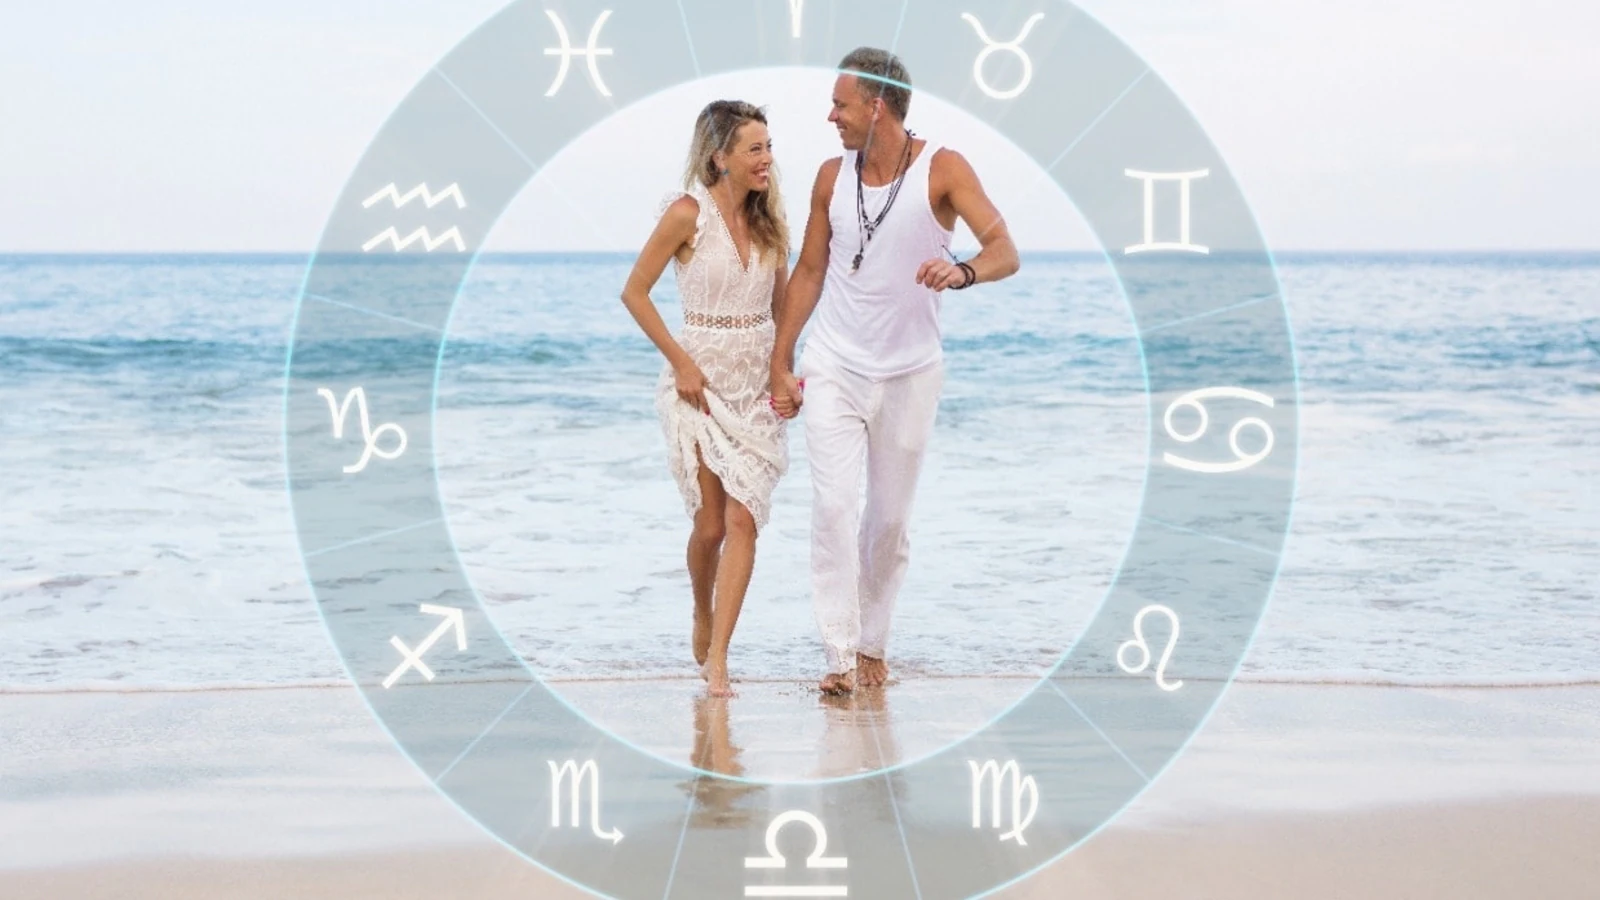 Love and Relationship Horoscope for April 9, 2022